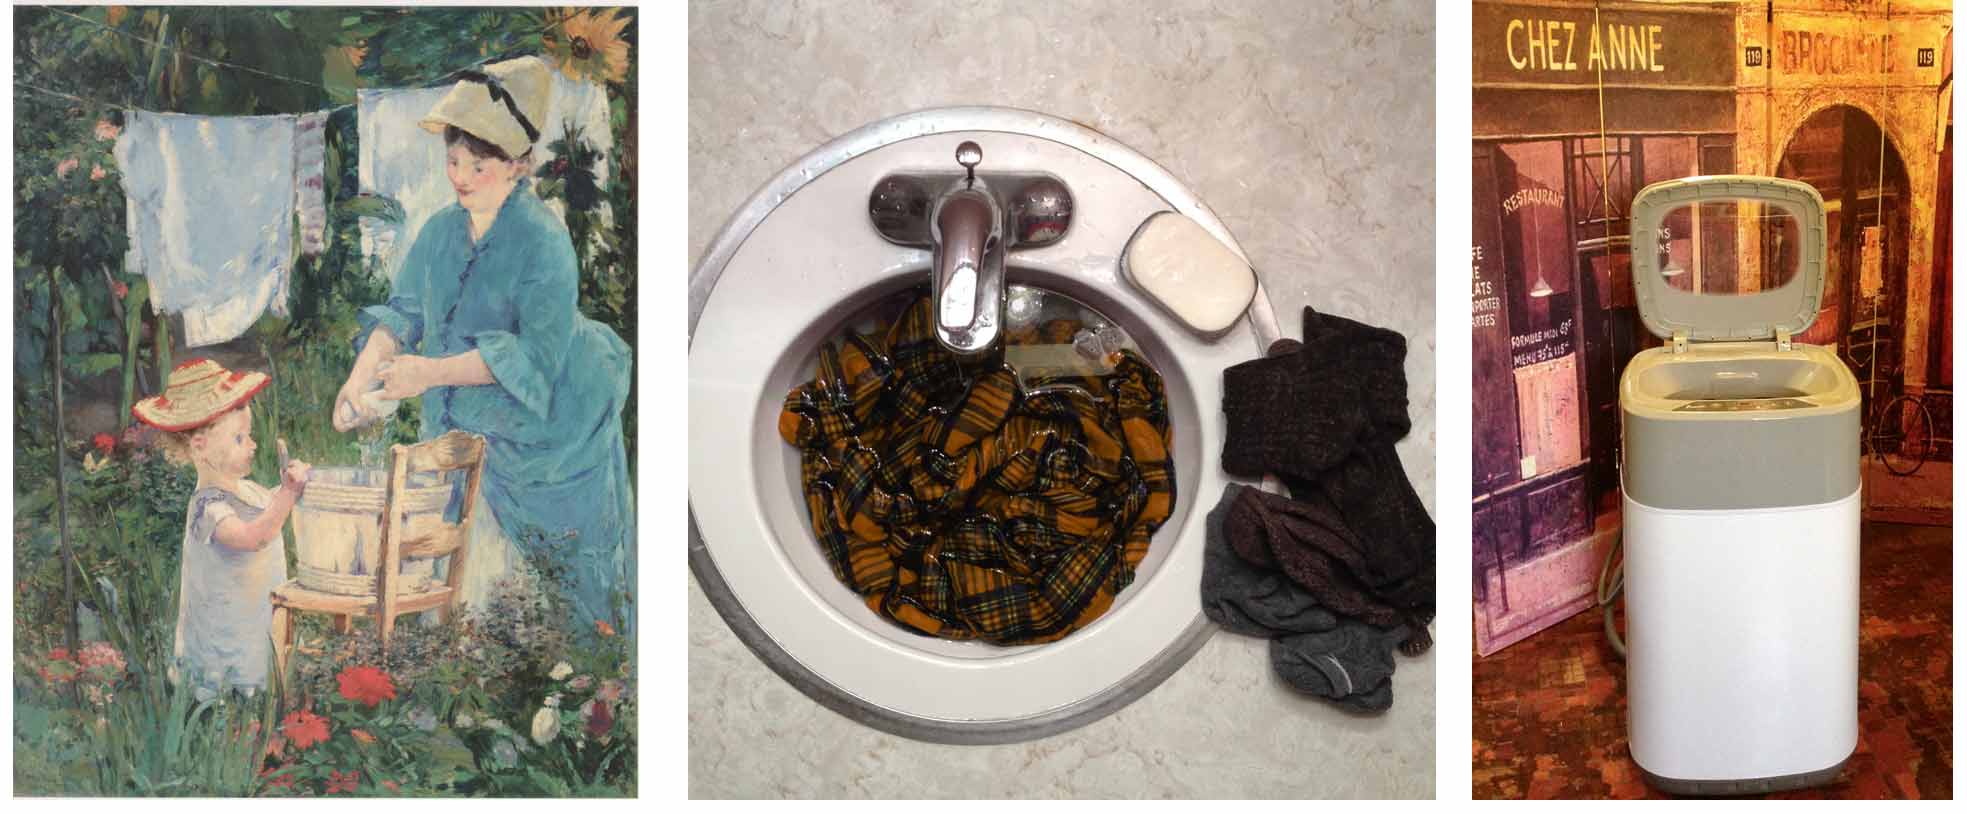 (left) painting Le Linge by Édouard Manet (center) hand laundry in bathroom basin (right) portable washer